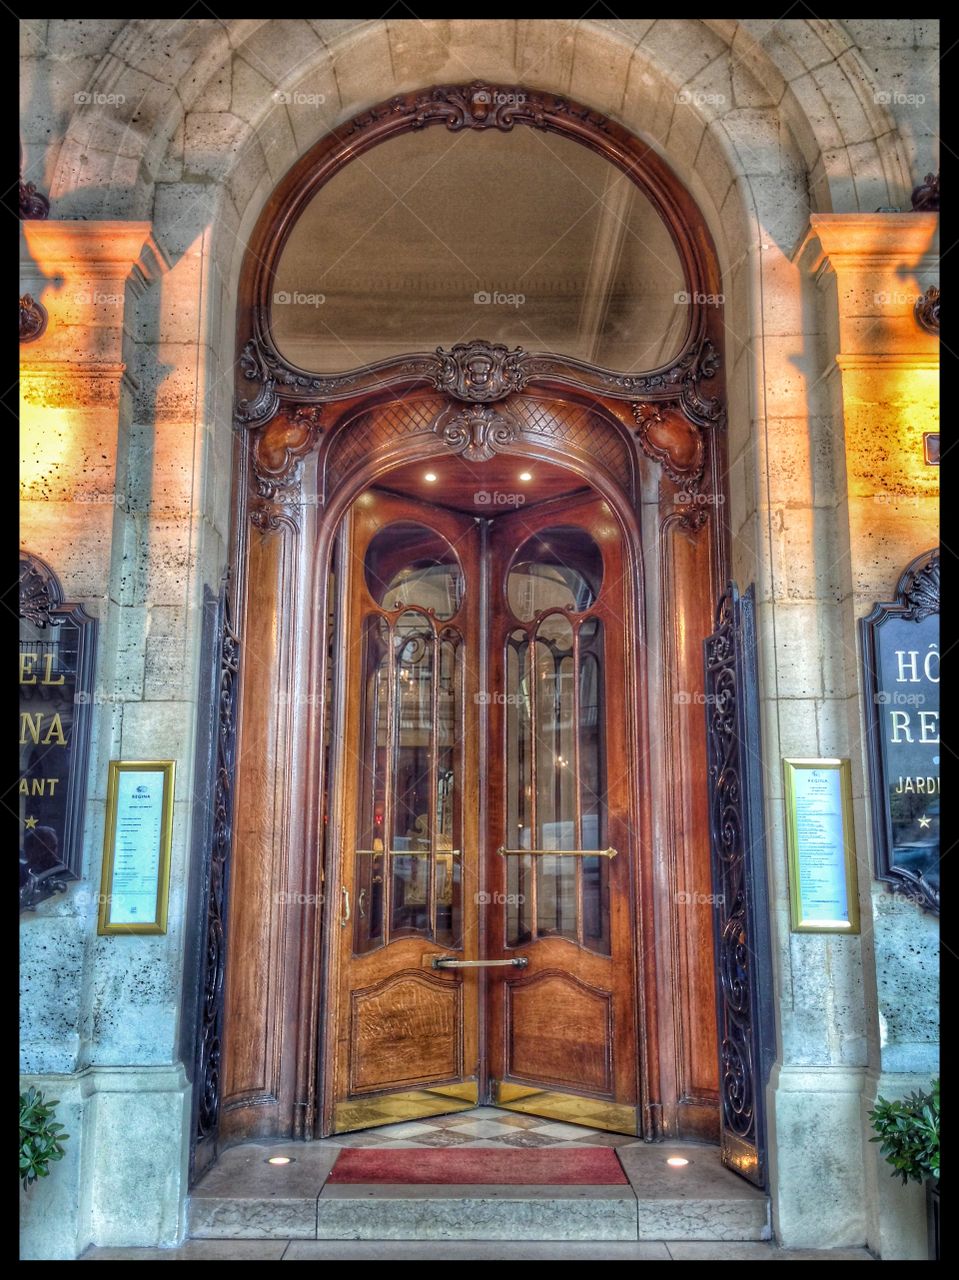 Hotel Regina - Paris. While visiting Paris I could not not take a photo of this revolving door.
